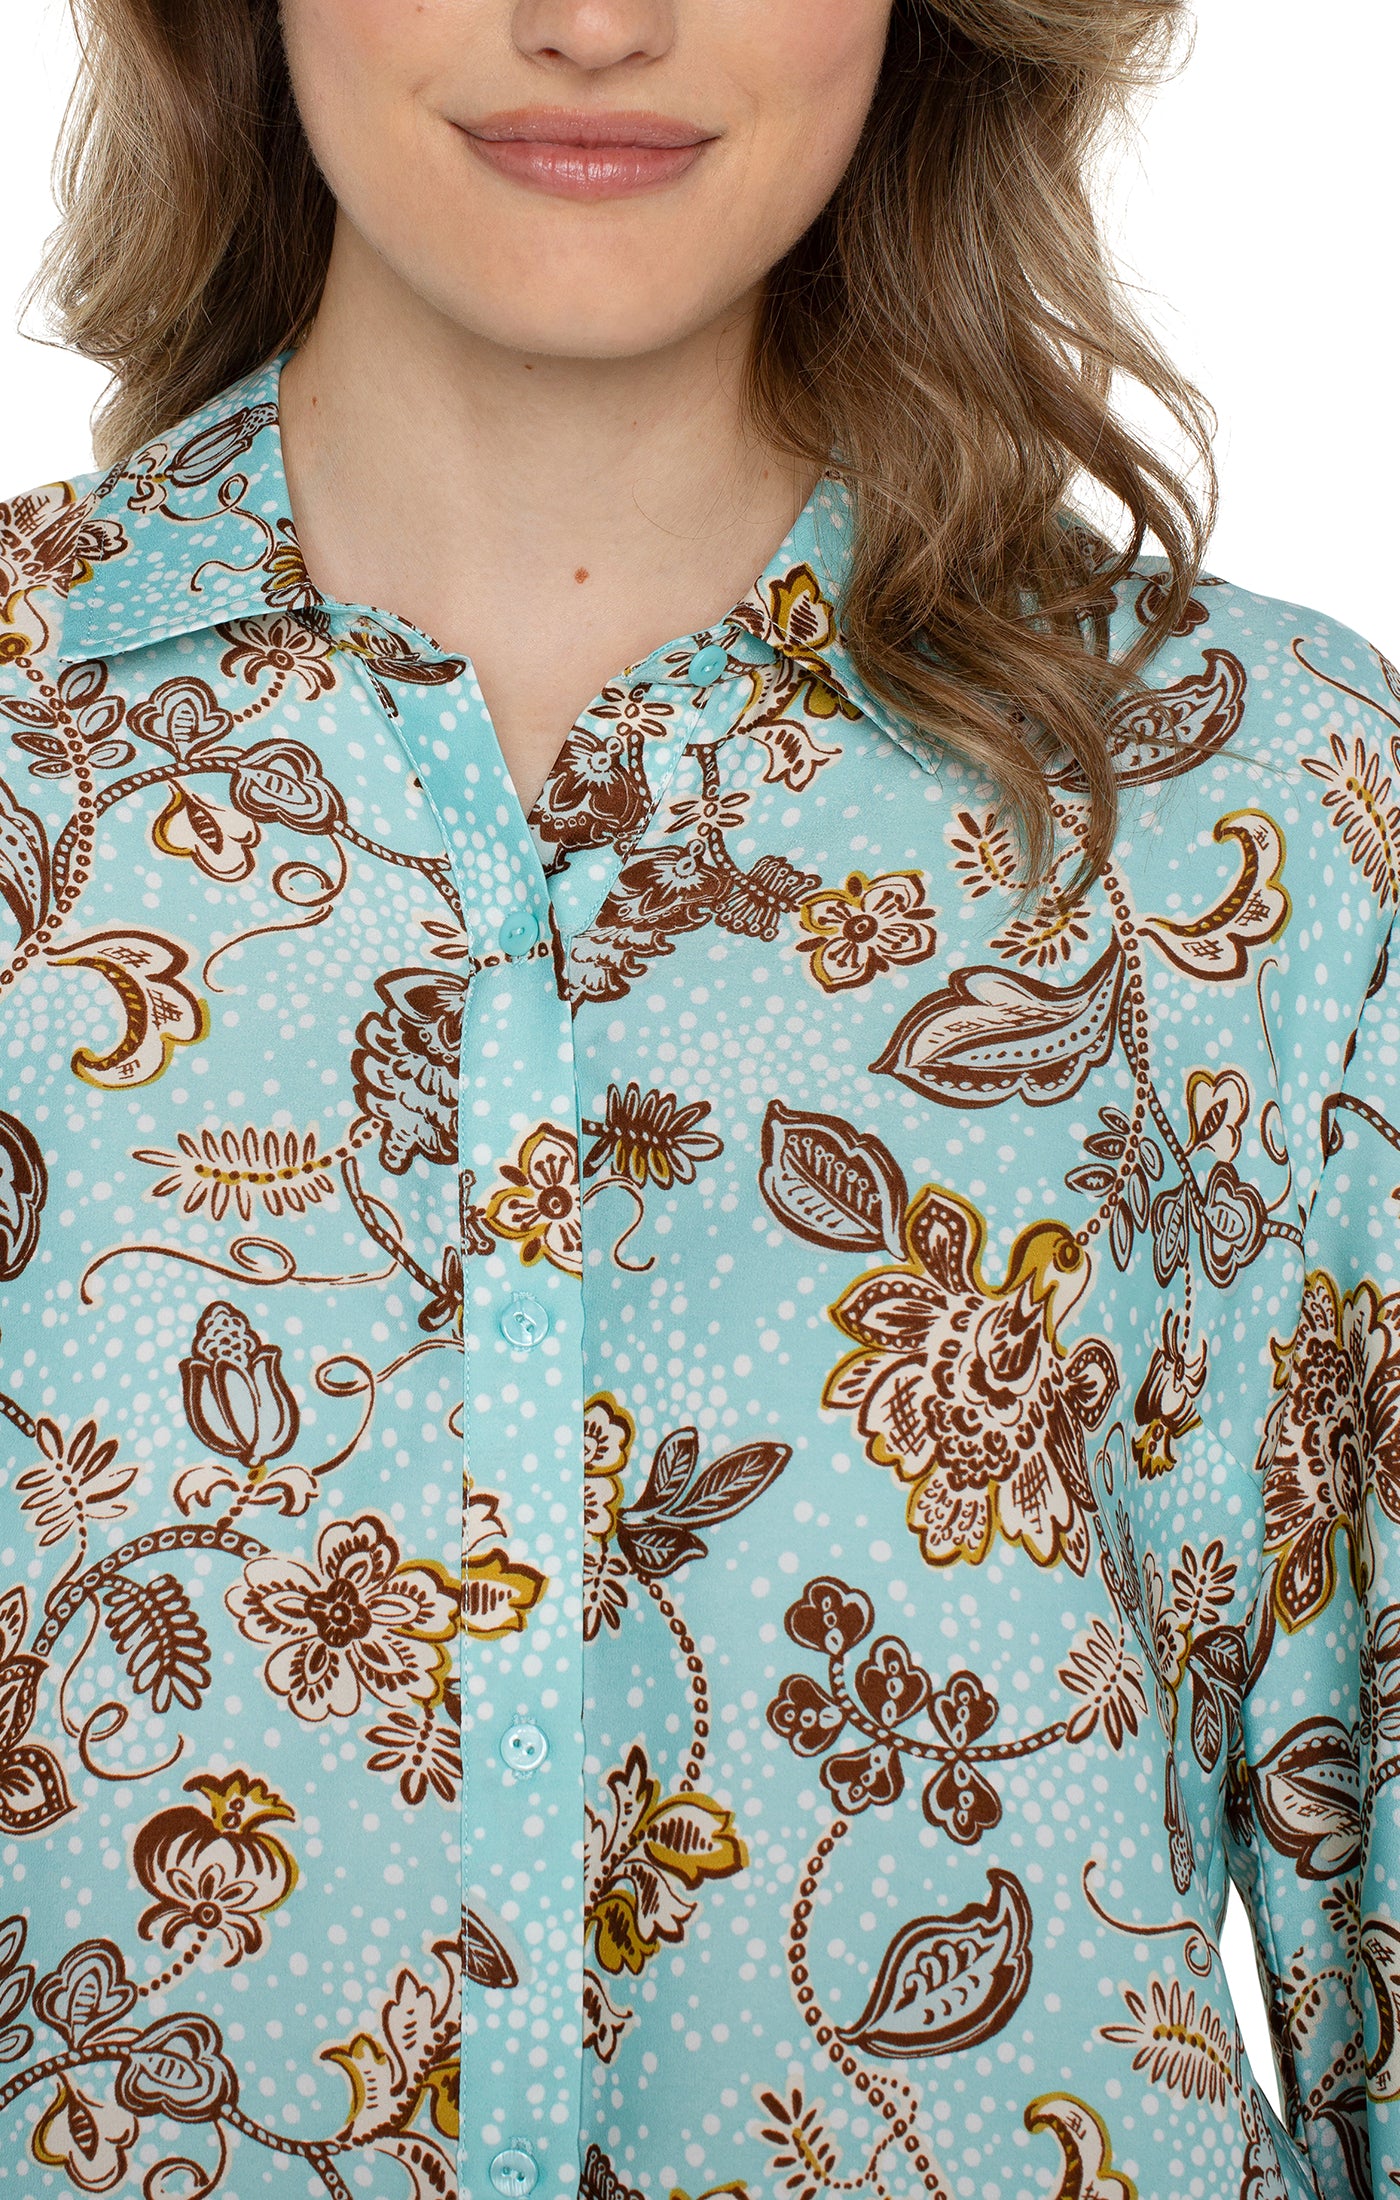 Liverpool Button Up Blouse Woven Pastel Turquoise Floral Close Up View